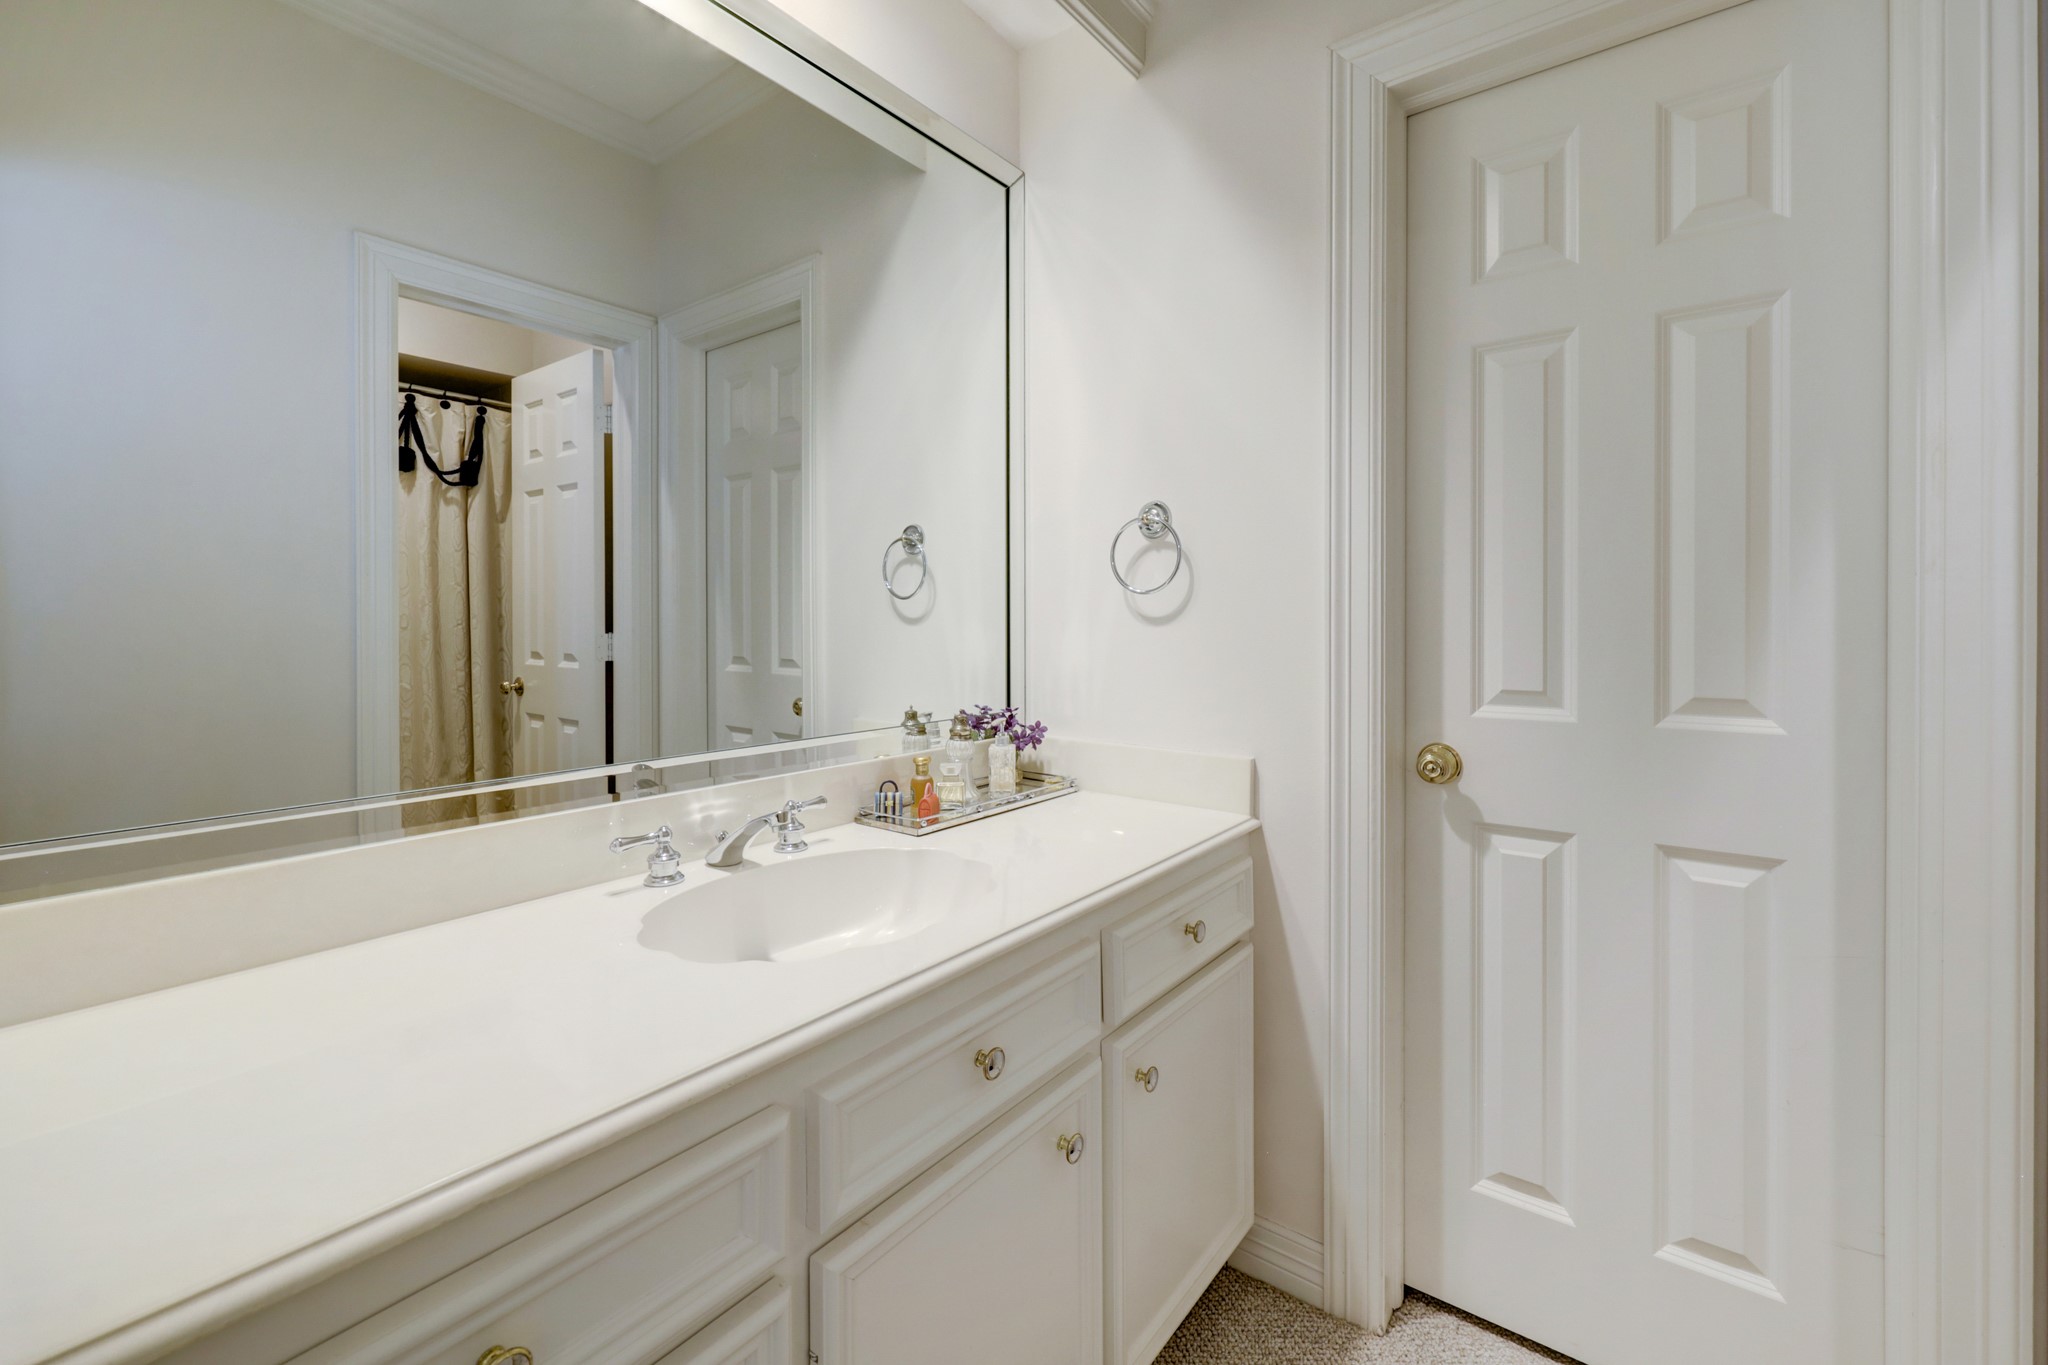 En suite bathroom with shower/tub combo, private water closet and spacious walk-in closet.
